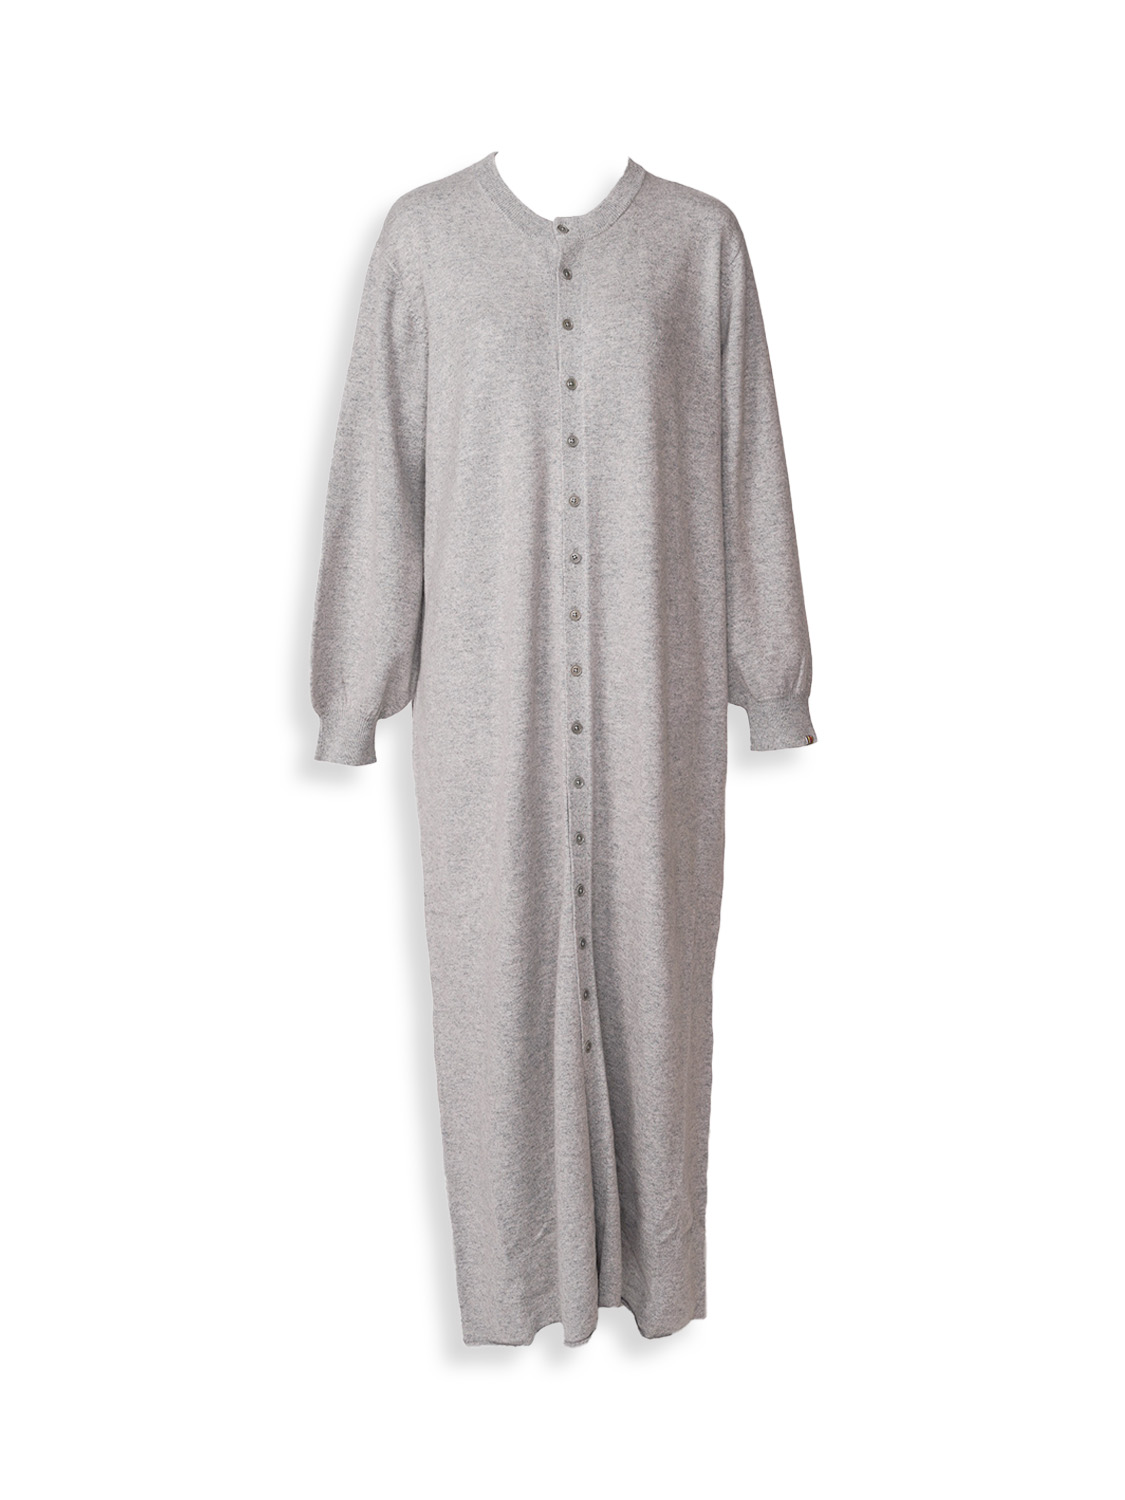 n° 281 Santa - Knitted dress with button placket in cashmere